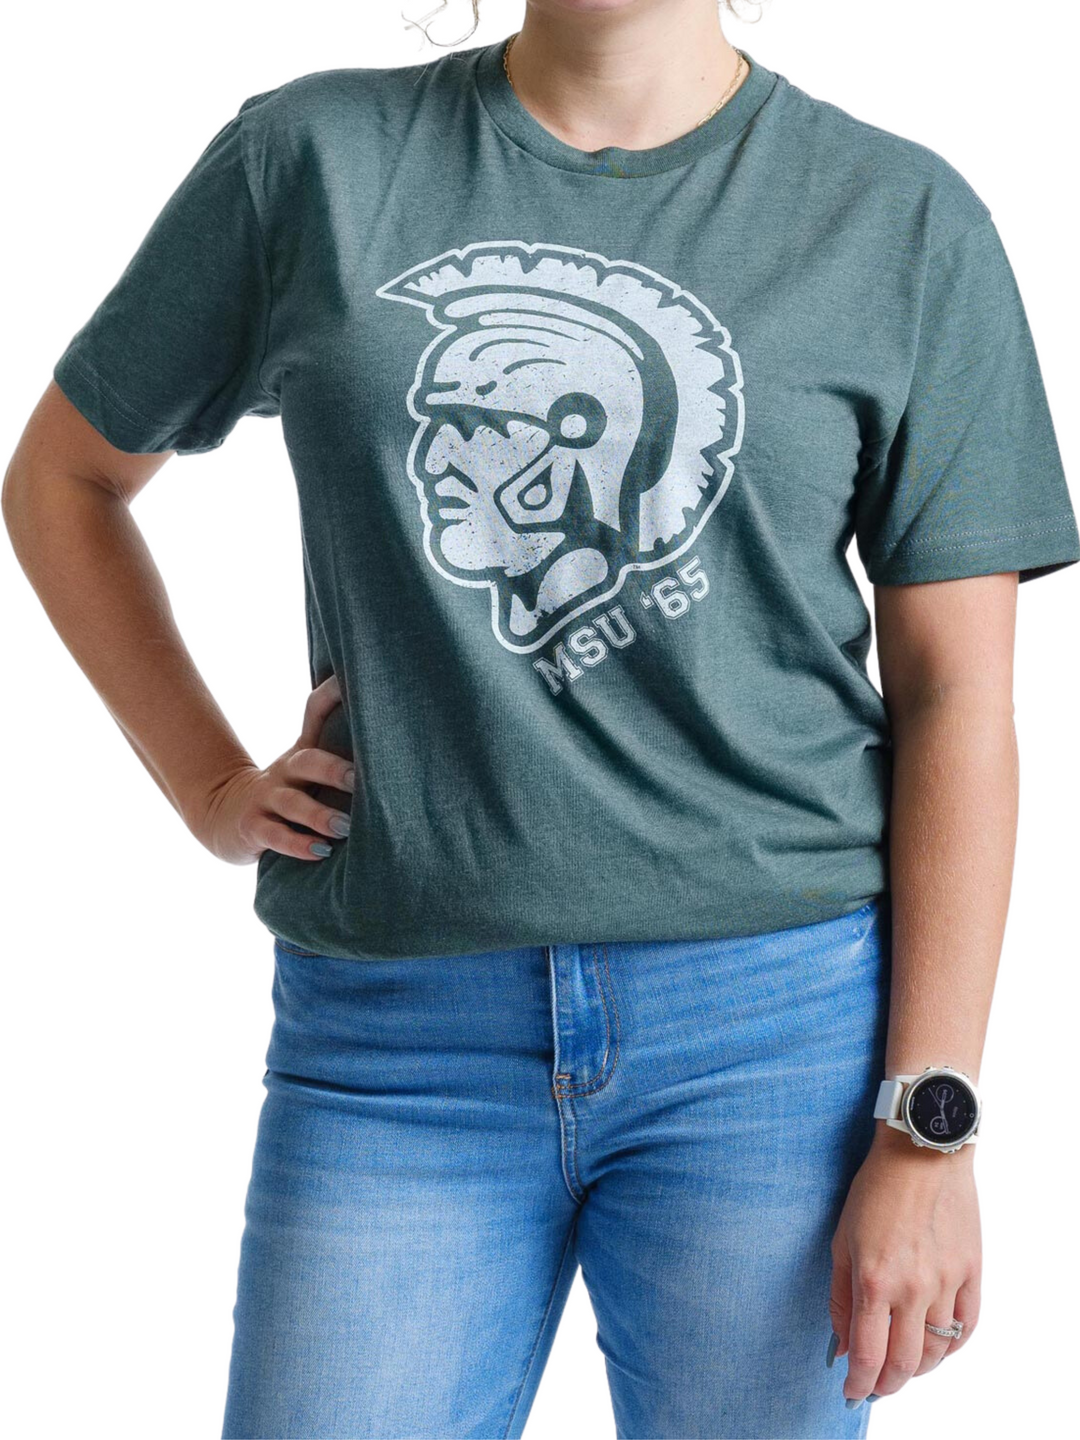 Green Michigan State Vintage T Shirt with 1965 Spartan Helmet Logo on Female